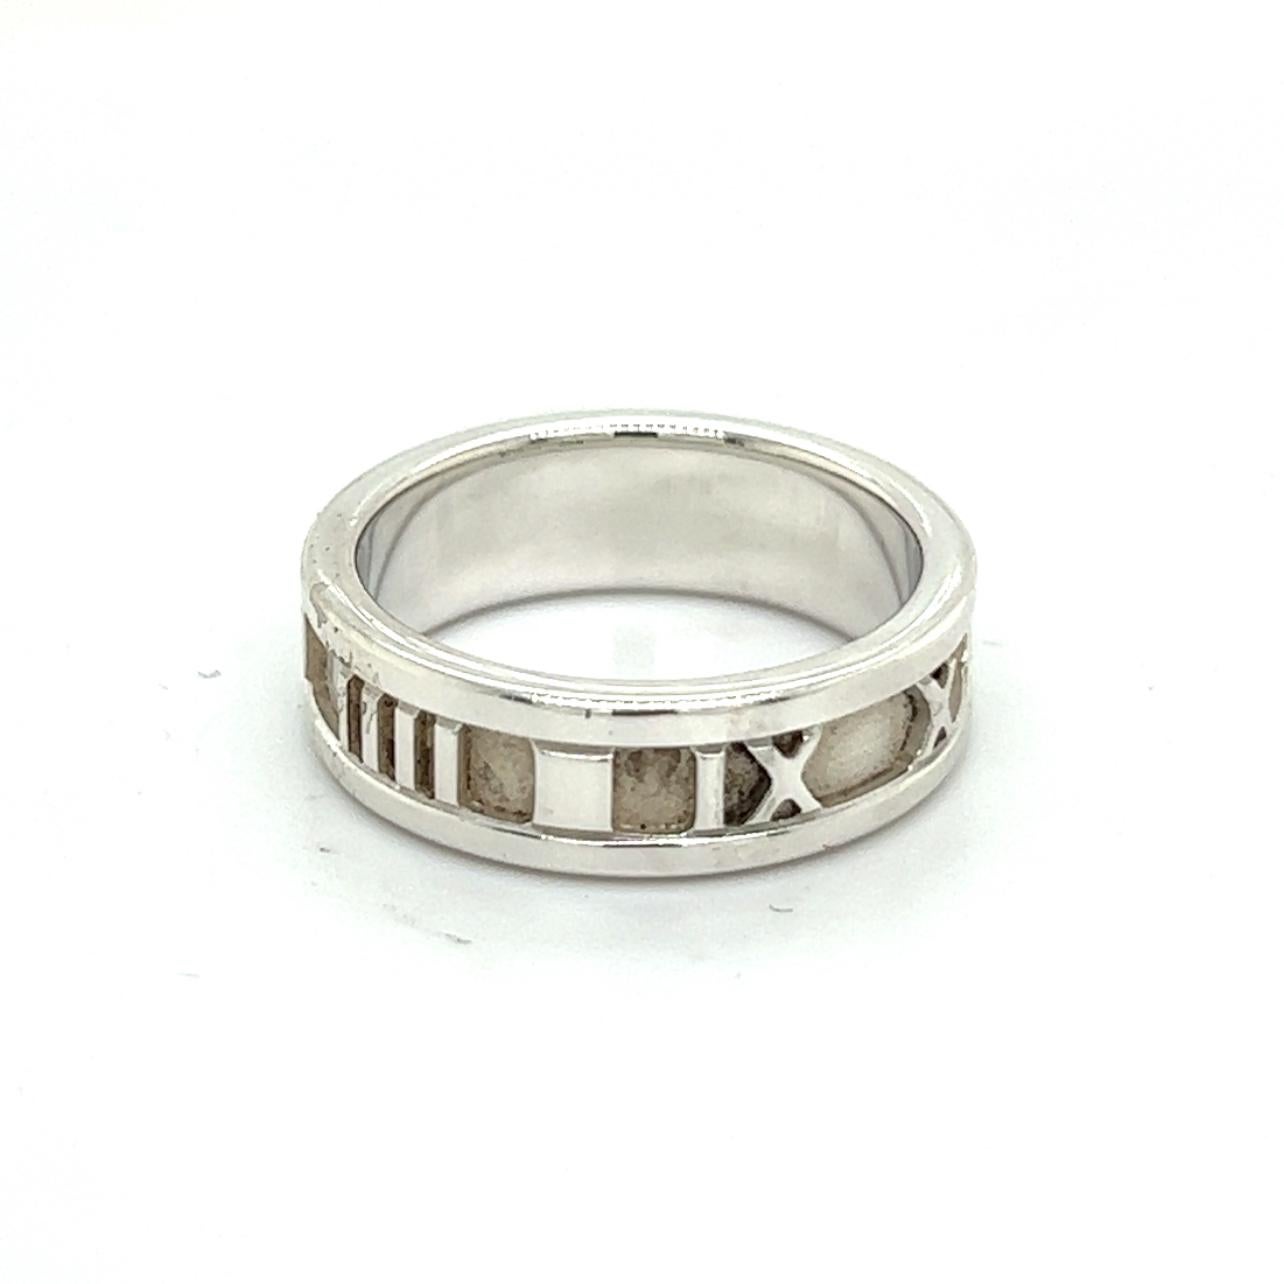 Authentic Tiffany & Co Estate Atlas Ring Size 6.5 Silver 6 mm TIF379

TRUSTED SELLER SINCE 2002

DETAILS
Ring Size: 6.5
Height: 6 mm
Weight: 5.8 Grams
Metal: Sterling Silver

We try to present our estate items as best as possible and most have been